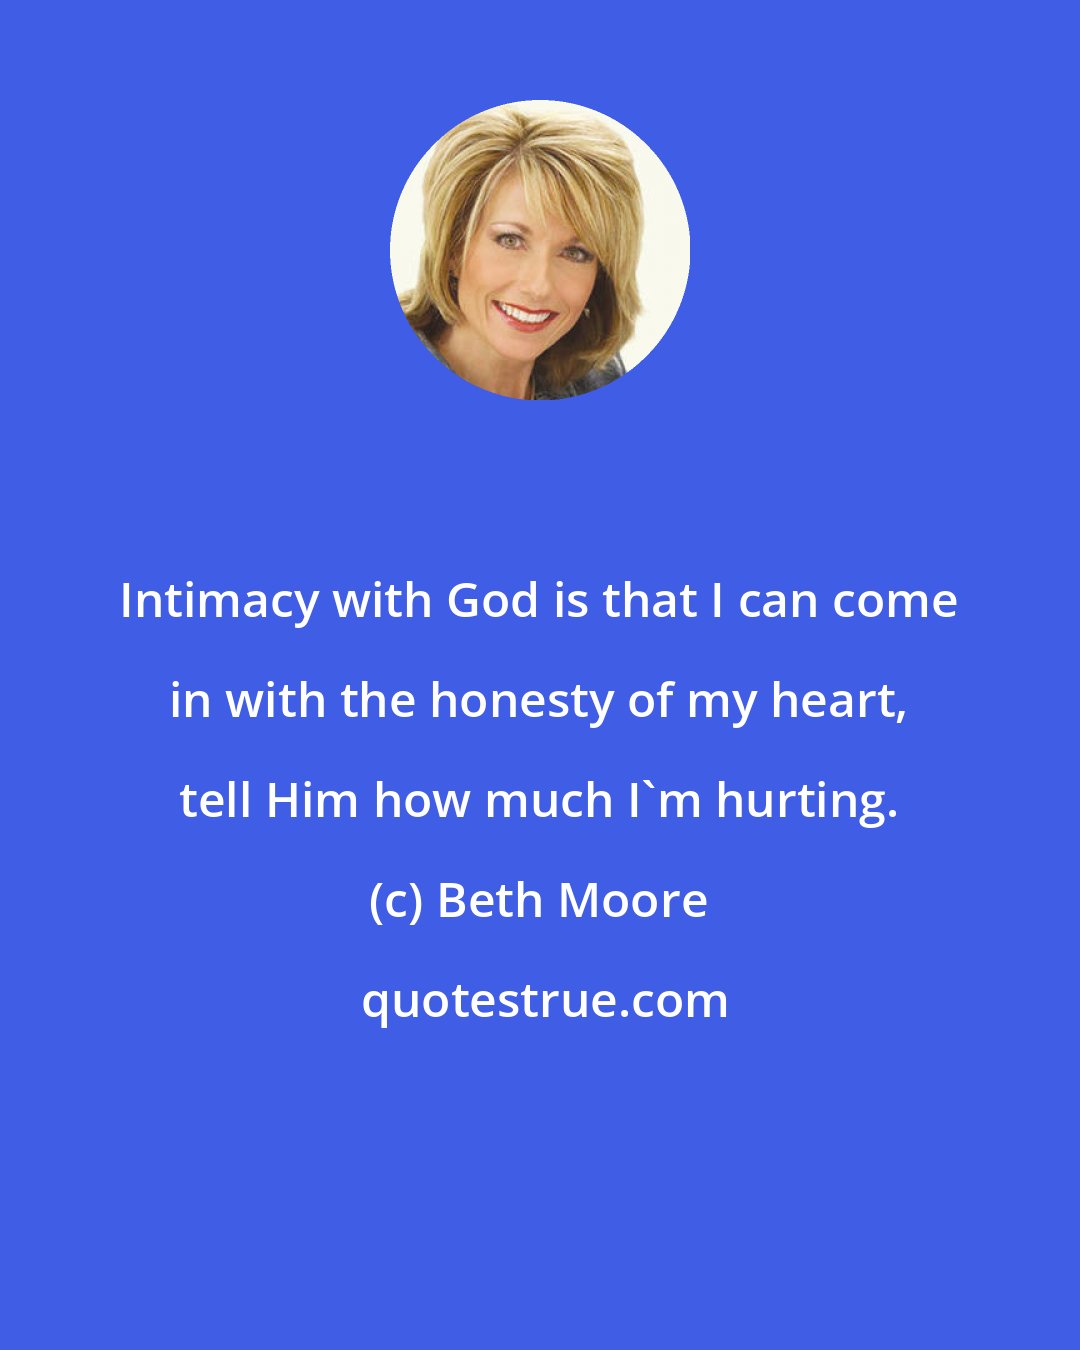 Beth Moore: Intimacy with God is that I can come in with the honesty of my heart, tell Him how much I'm hurting.